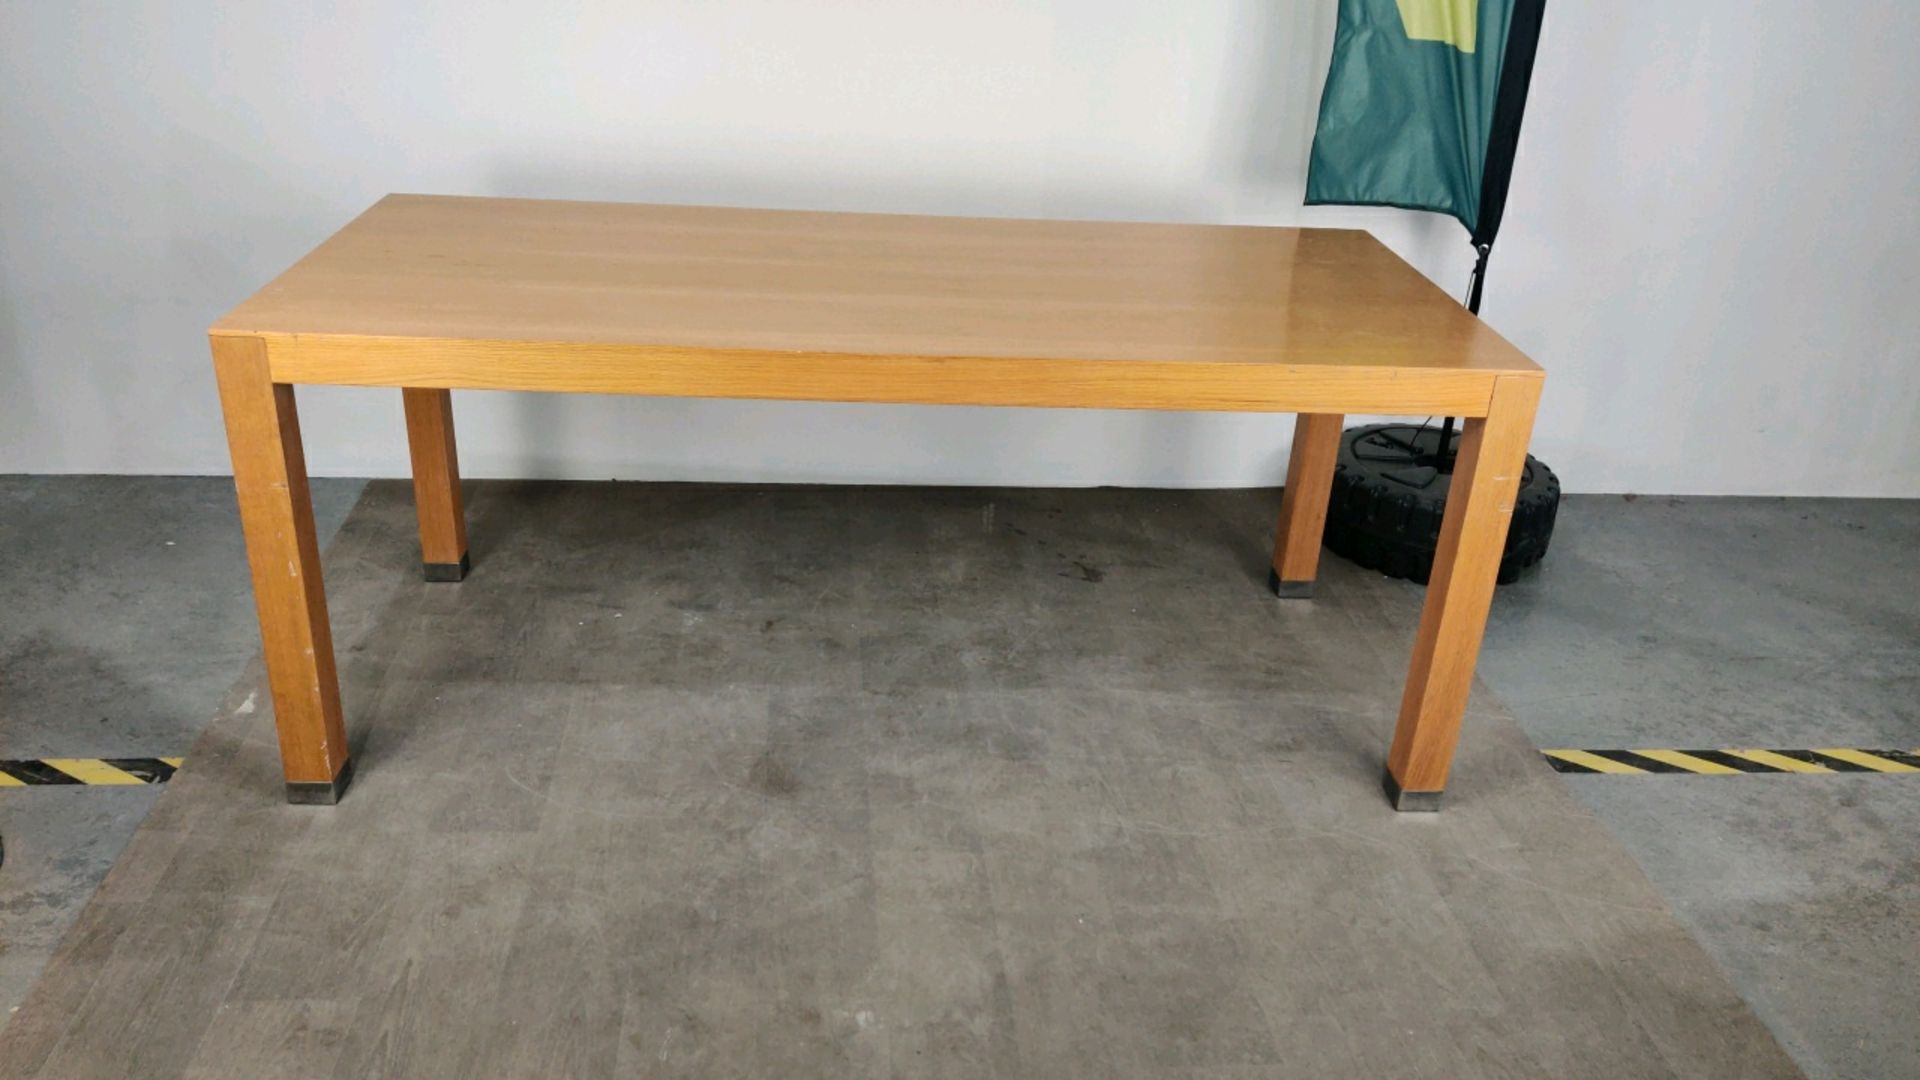 Large Wooden Table With Chromed Feet - Image 7 of 10